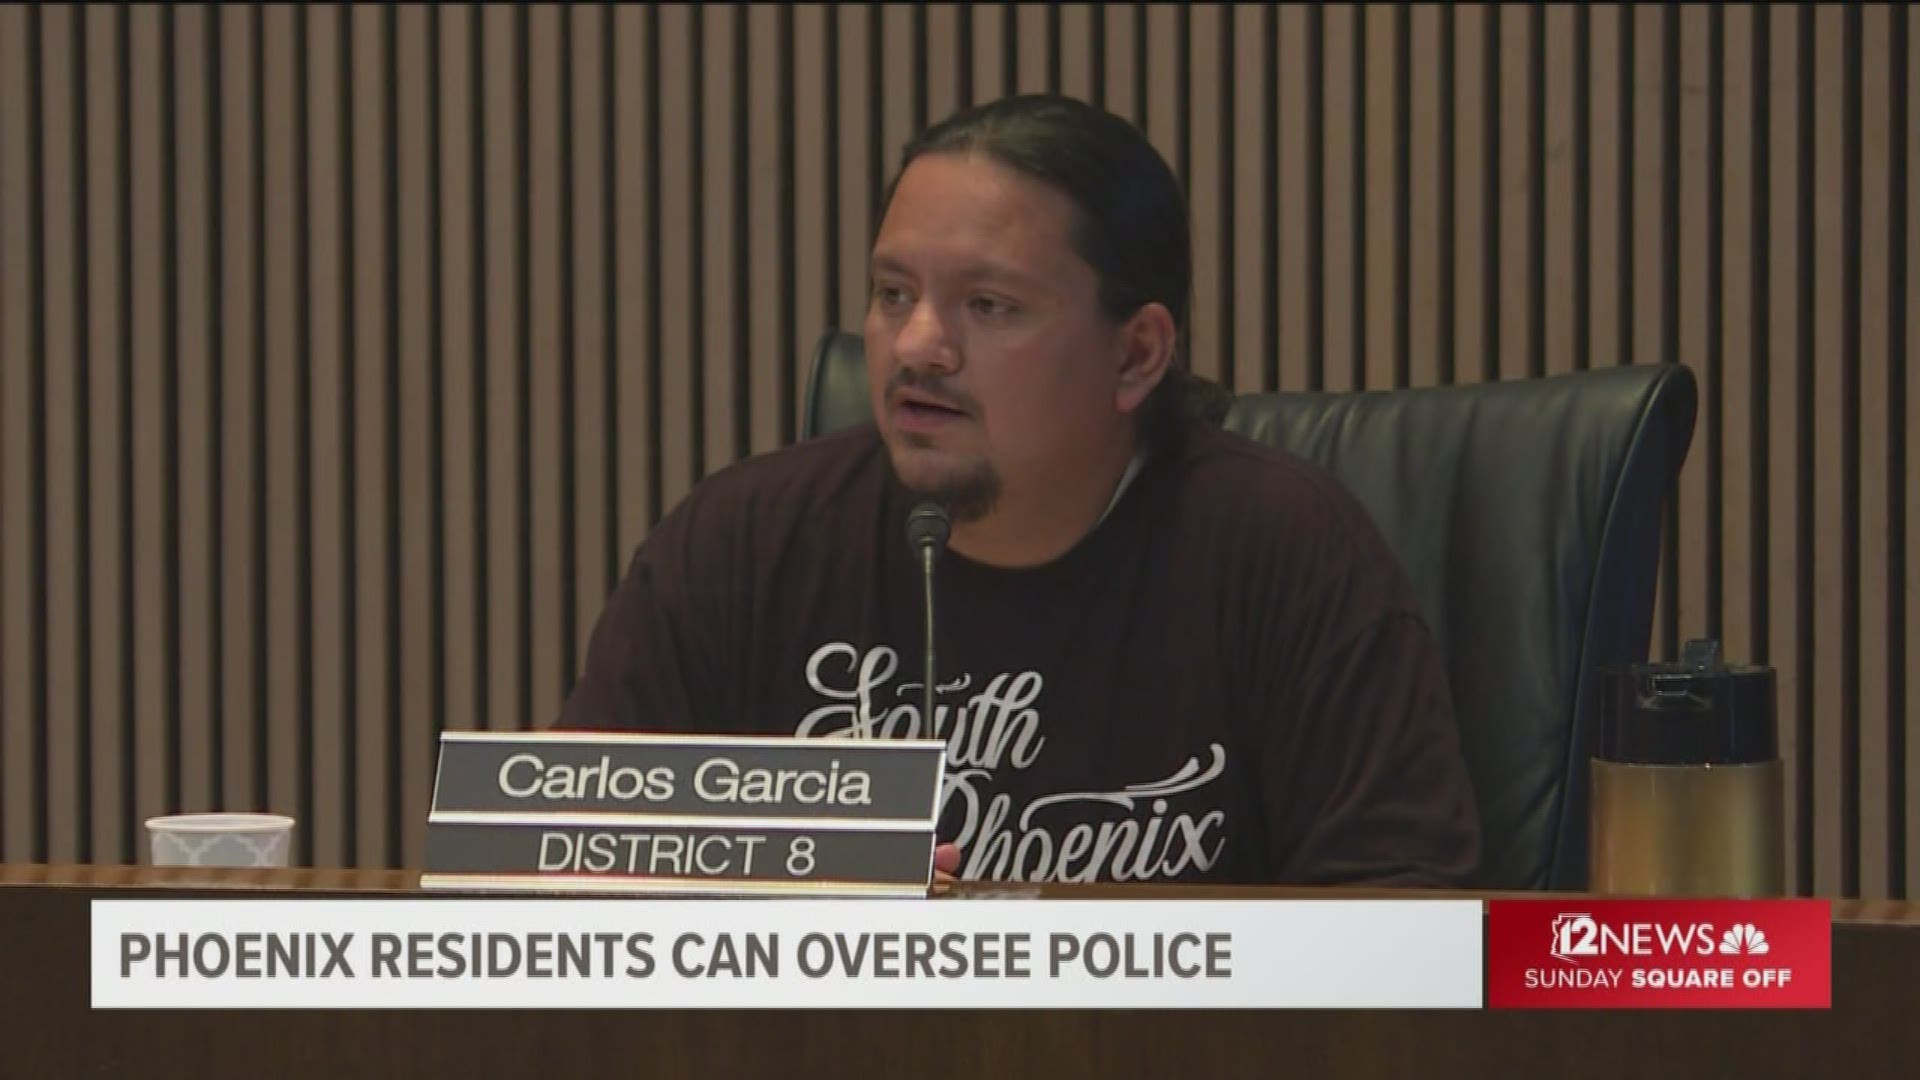 First-term Phoenix Councilman Carlos Garcia has been a frequent police critic.